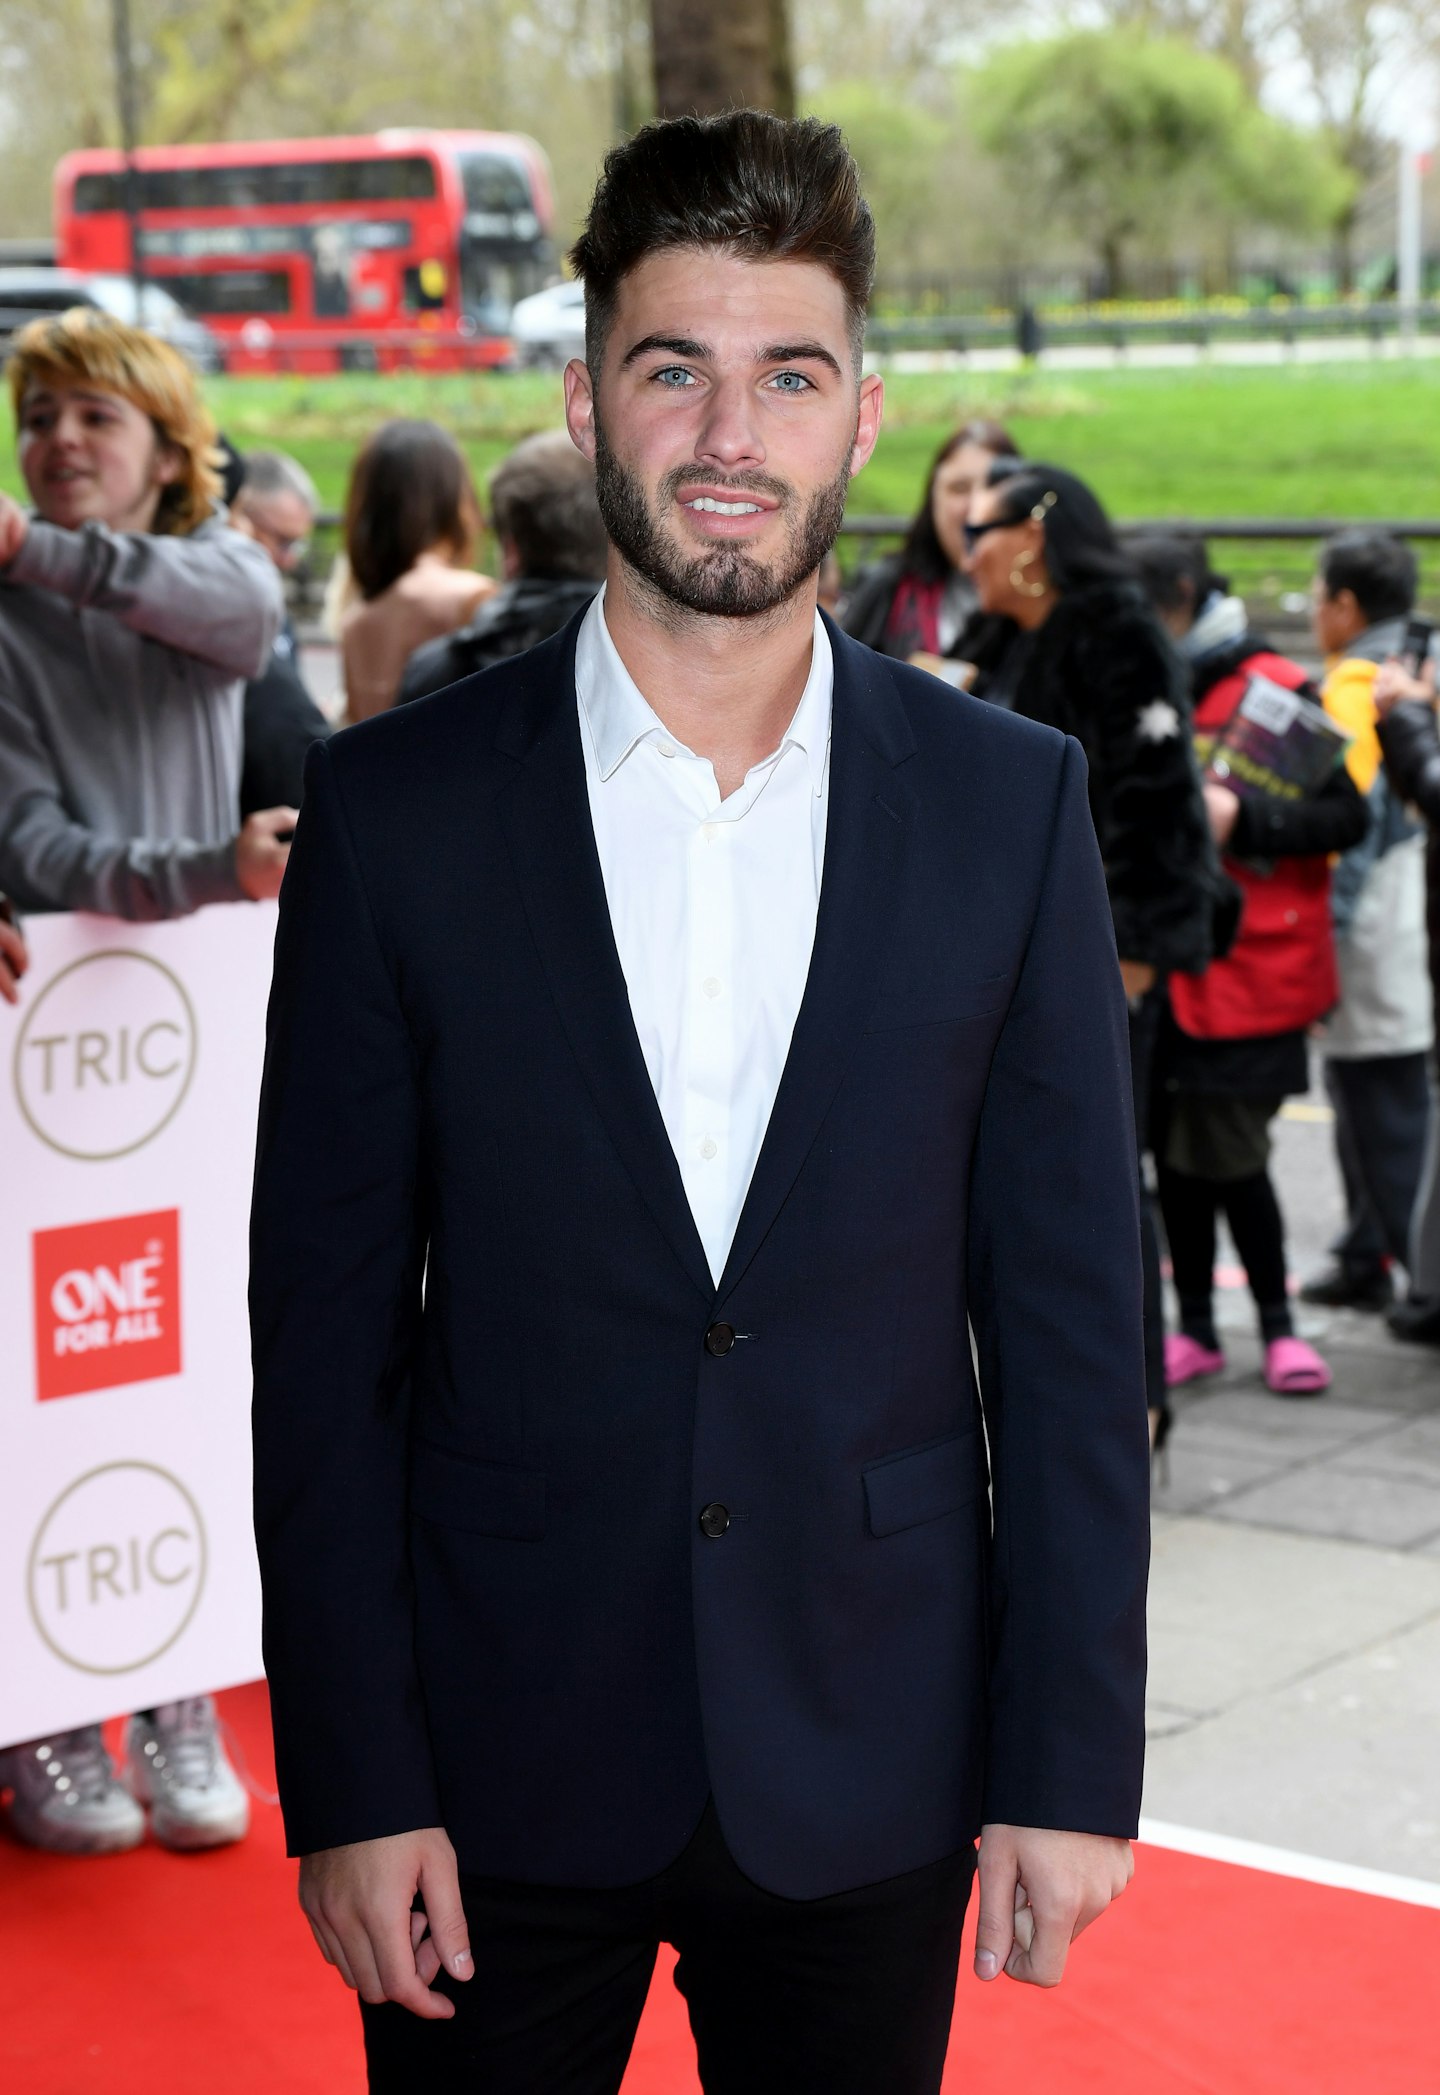 Joshua Ritchie attends the TRIC Awards 2020 at The Grosvenor House Hotel on March 10, 2020 in London, England.